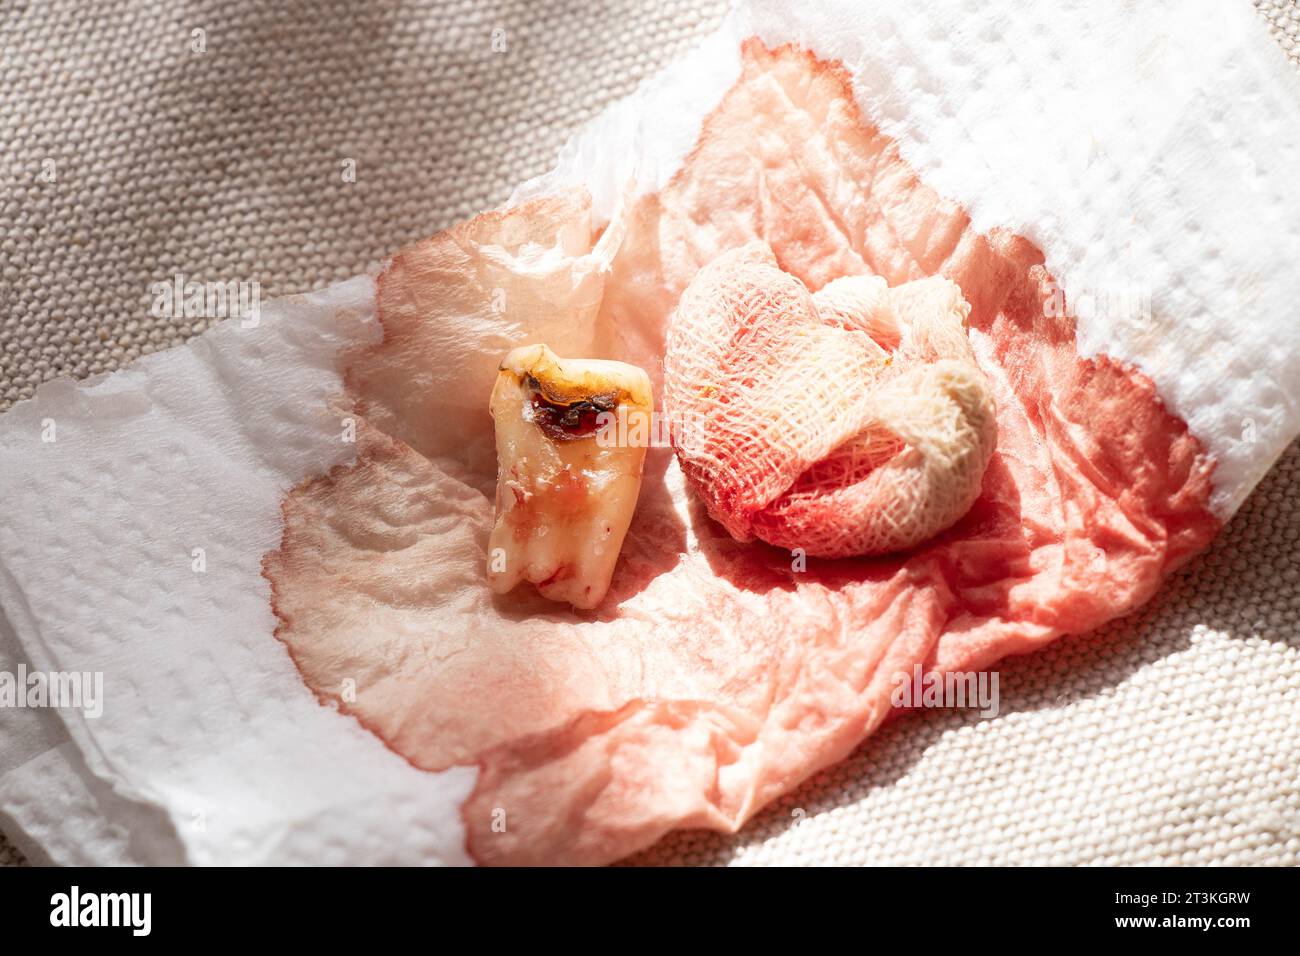 An extracted tooth with a black hole in the middle of the tooth, close-up against the background of a bandage with blood, a sick tooth after extractio Stock Photo